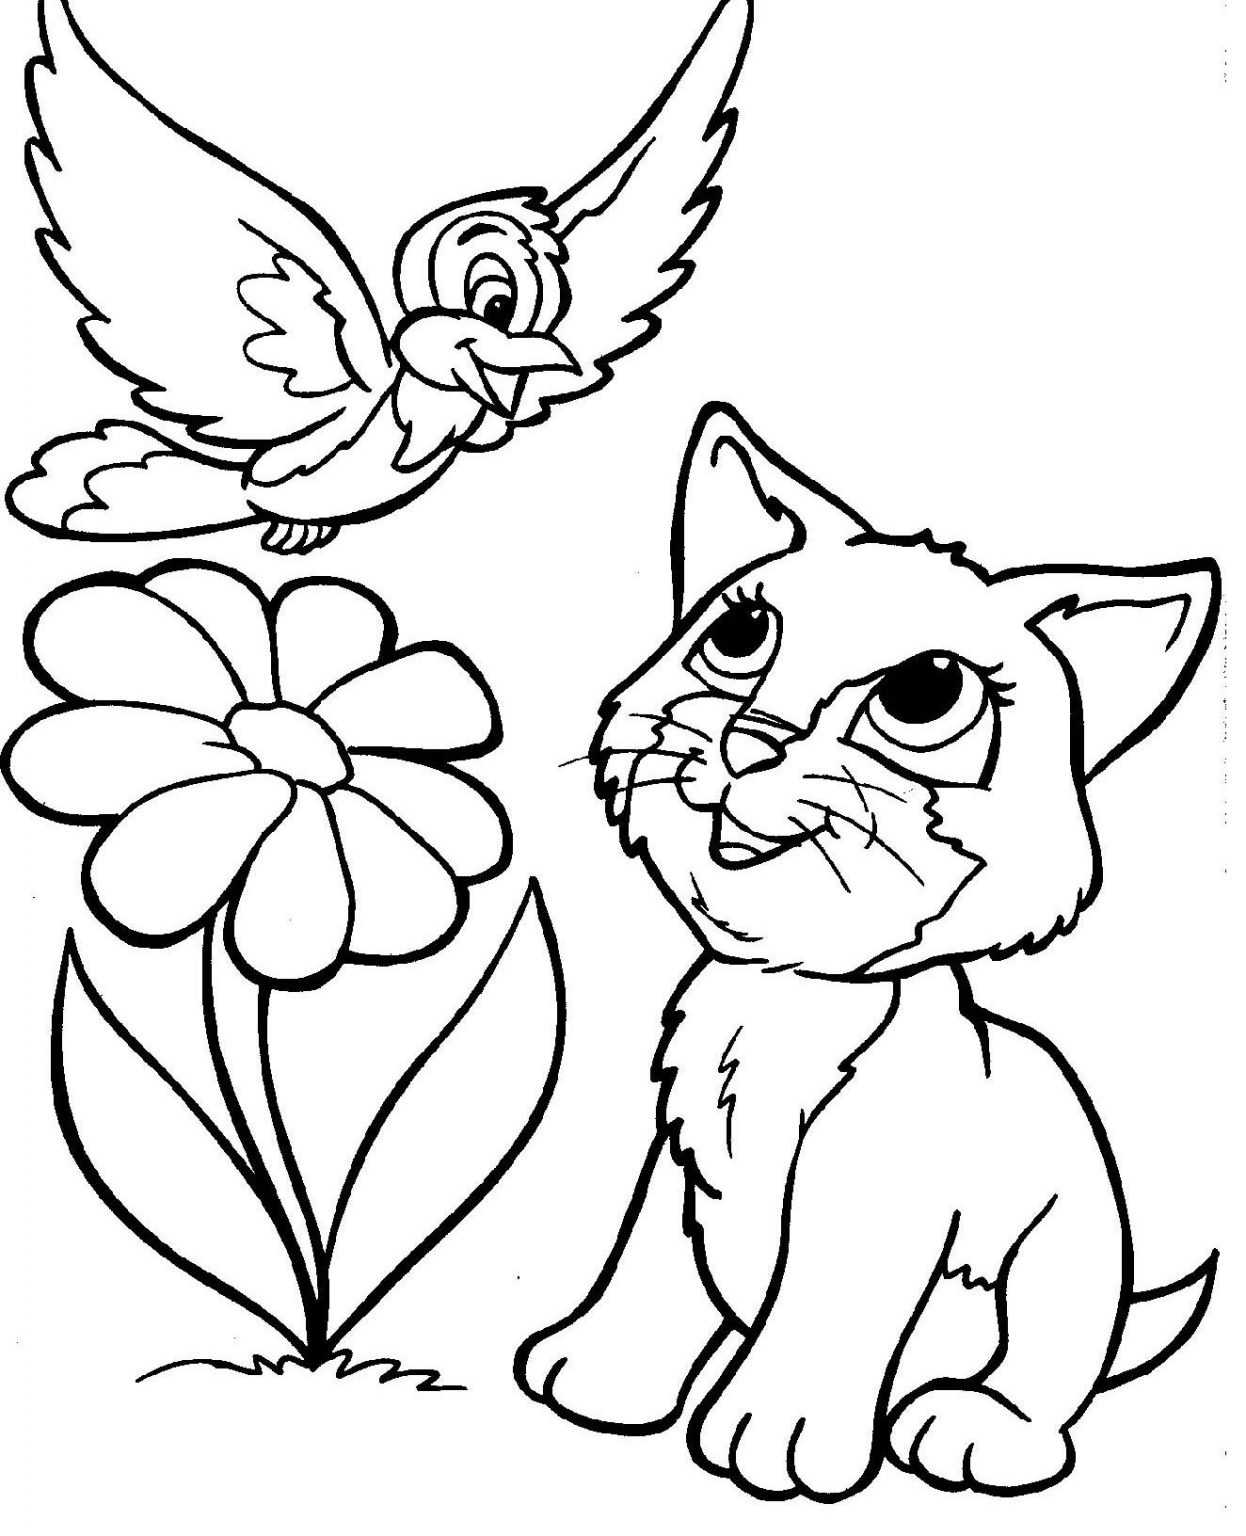 Kitty Cat Coloring Pages | BubaKids.com